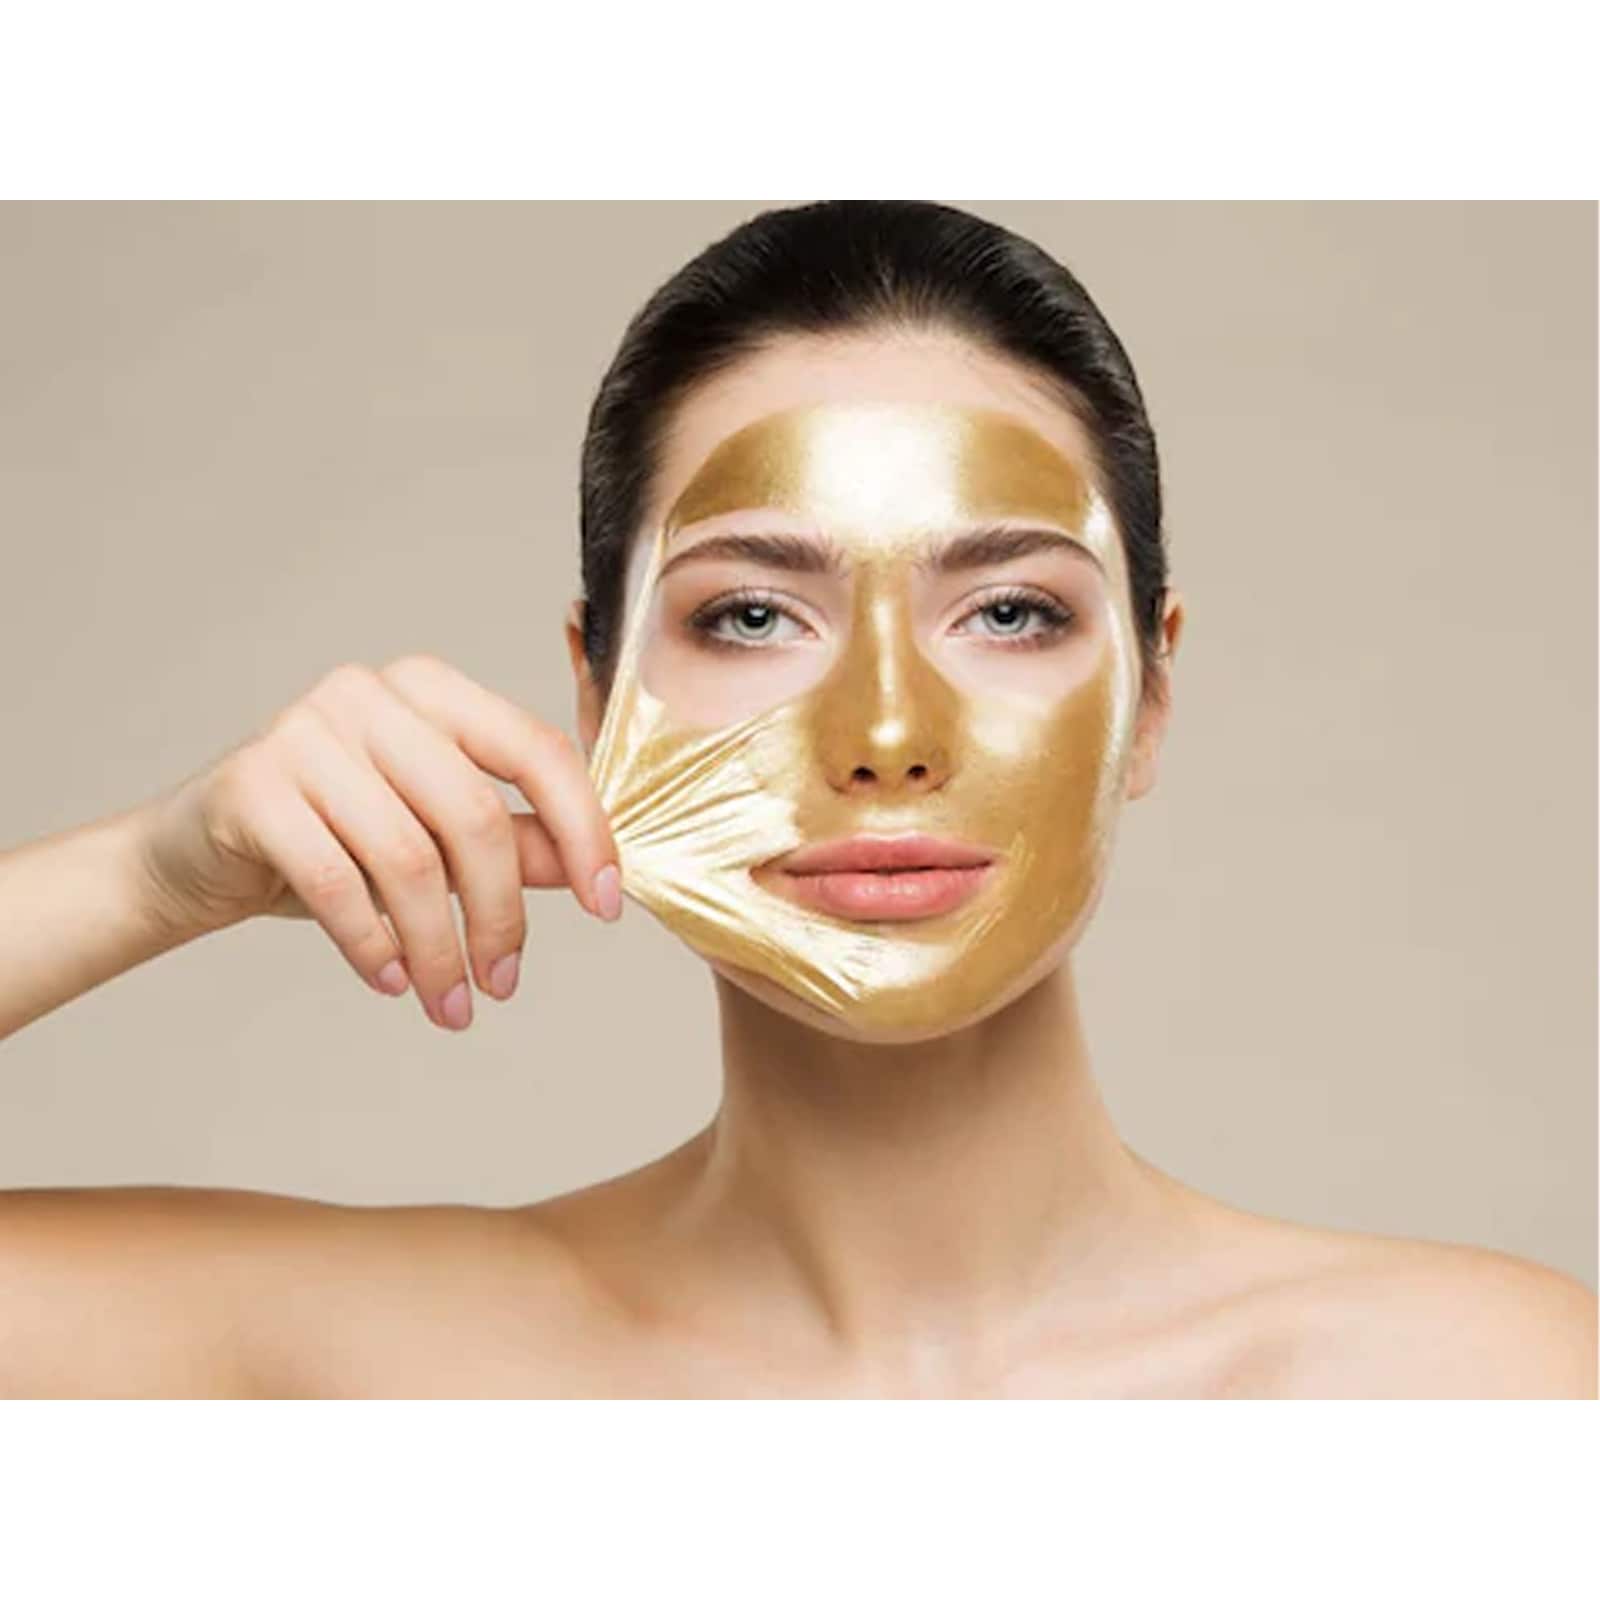 What Are The Benefits Of Peel-Off Masks? To Find -